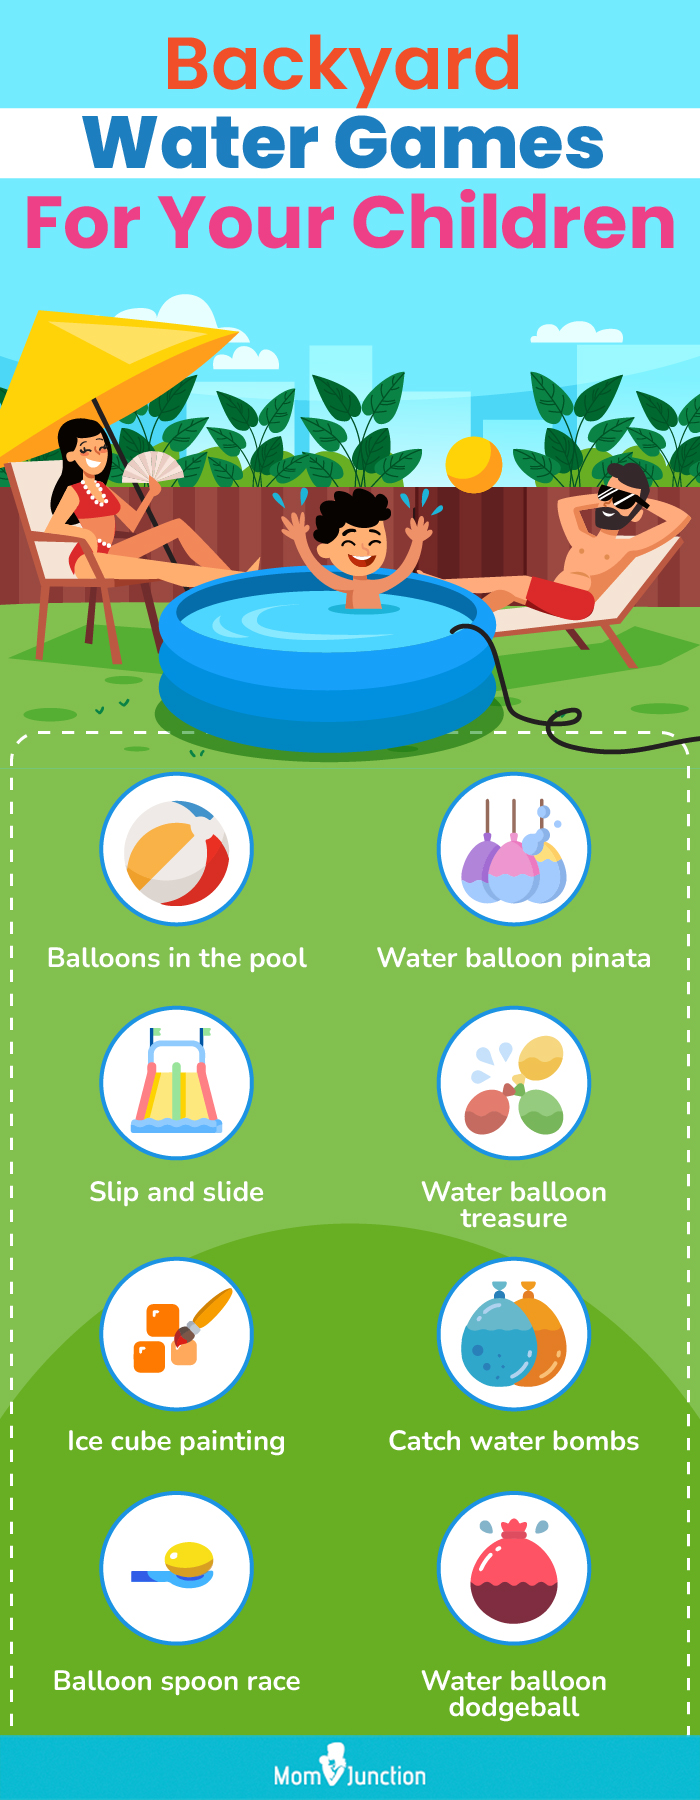 backyard water games for your children final (infographic)